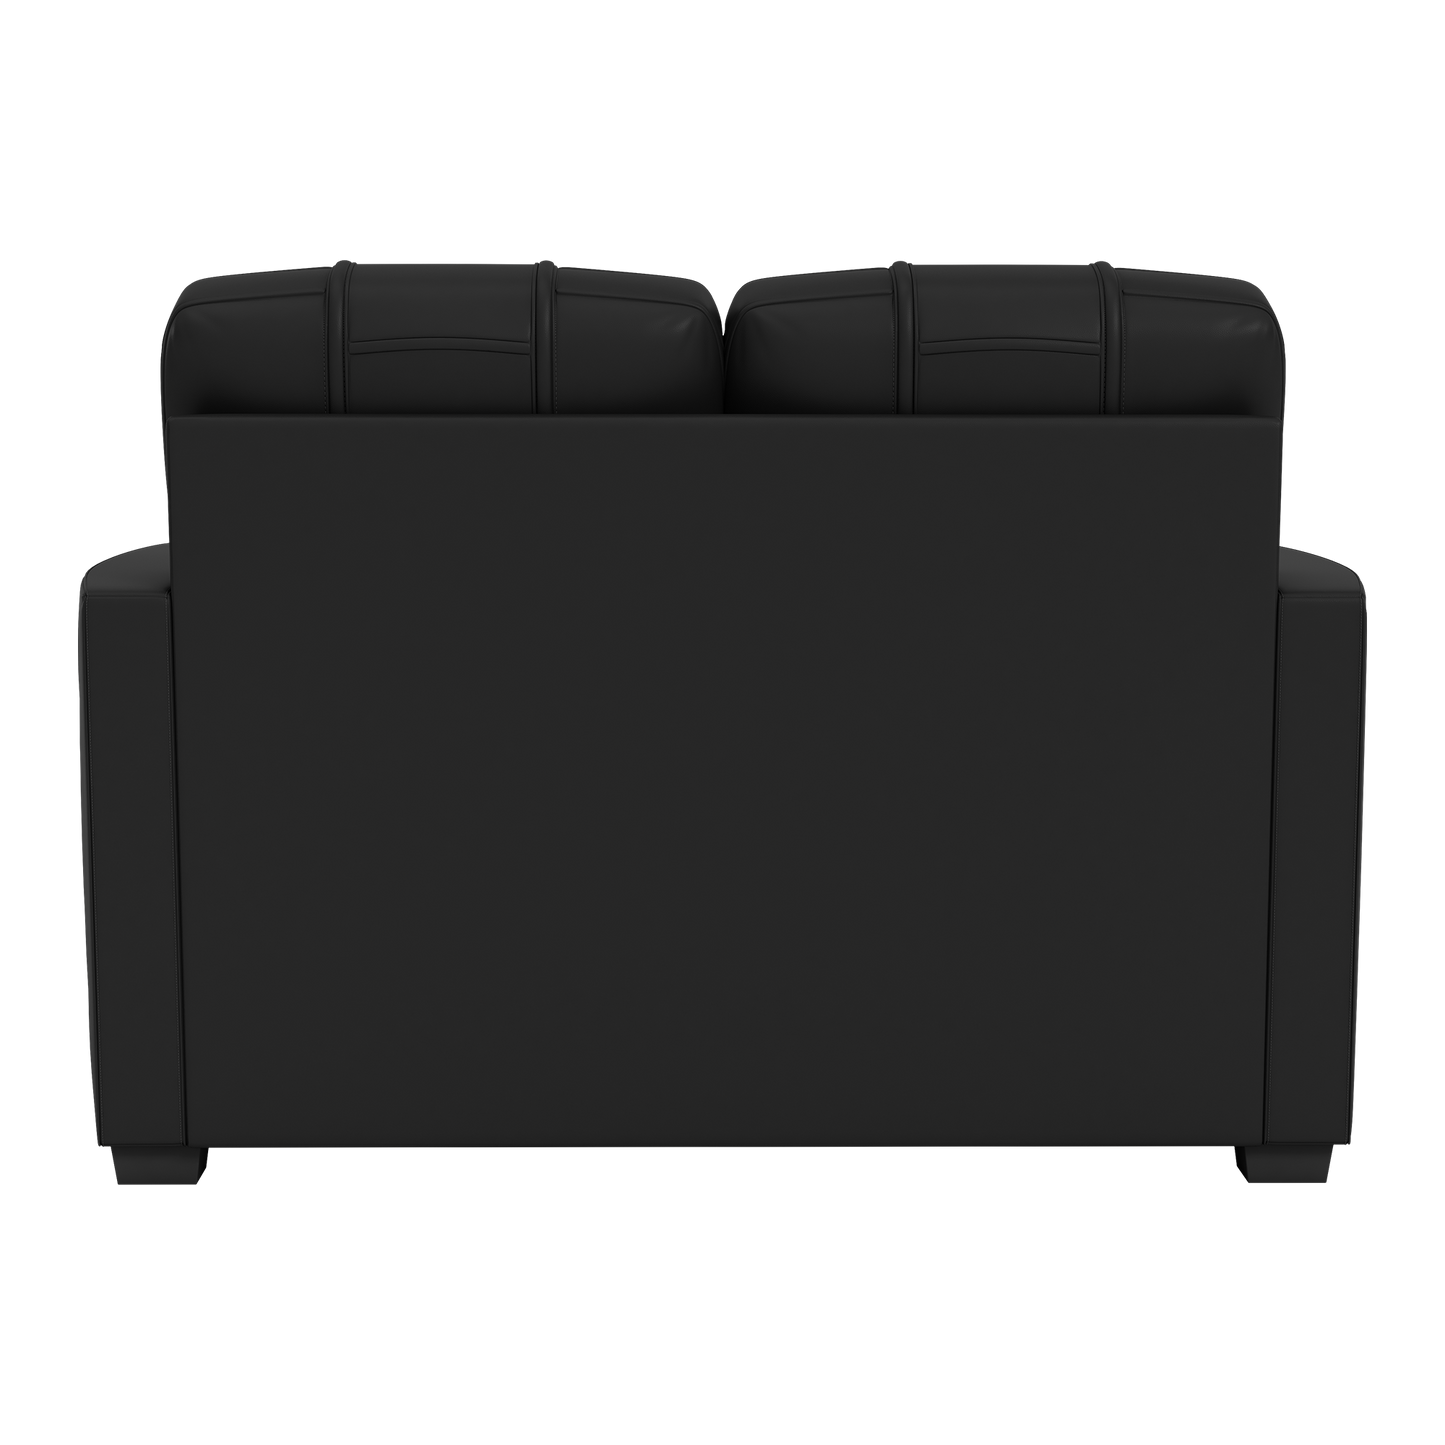 Silver Loveseat with New Orleans Pelicans Primary Logo